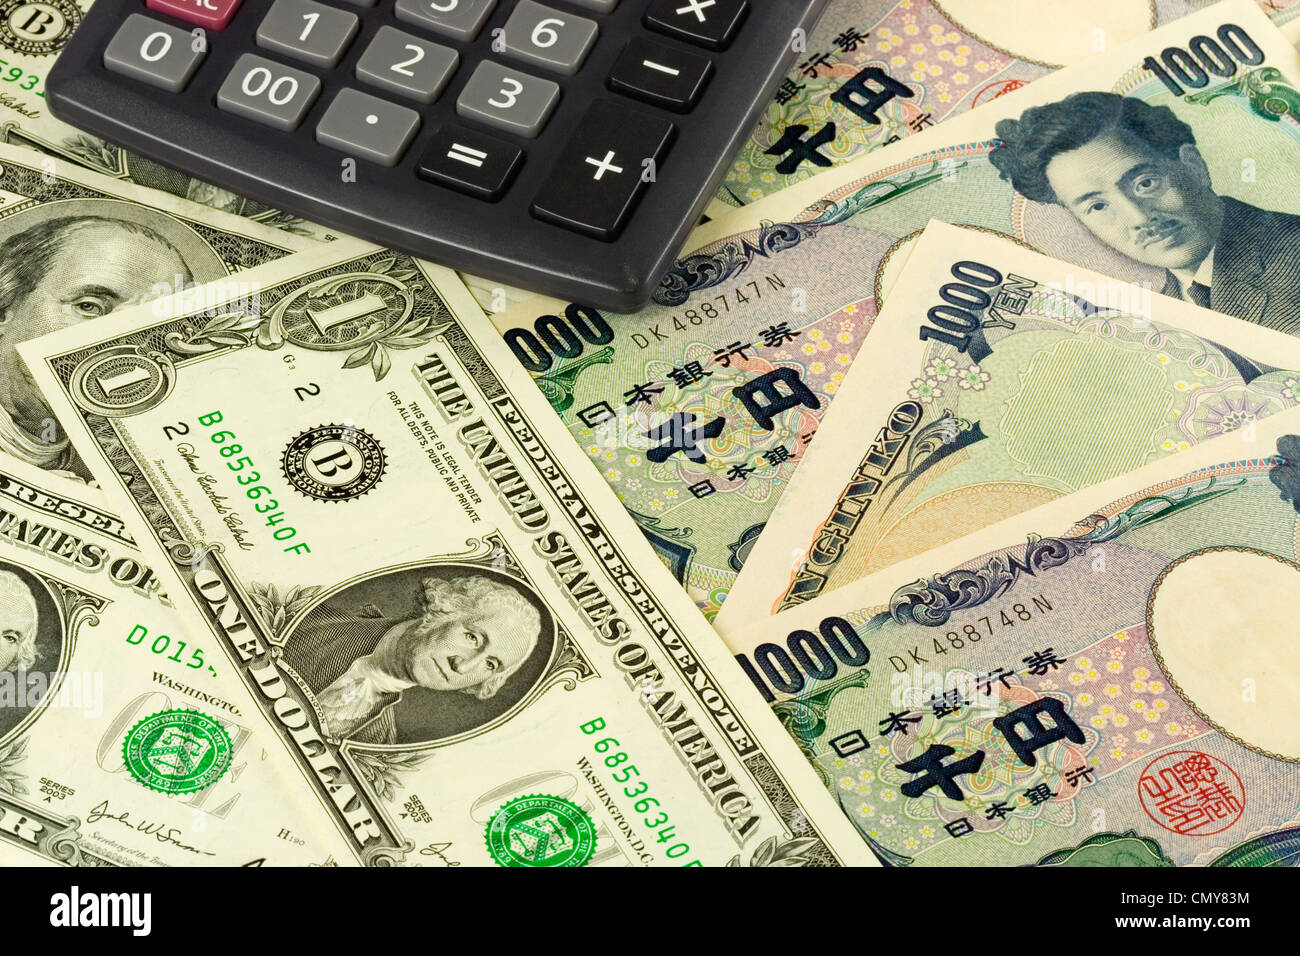 US and Japanese currency pair commonly used in forex trading with calculator Stock Photo